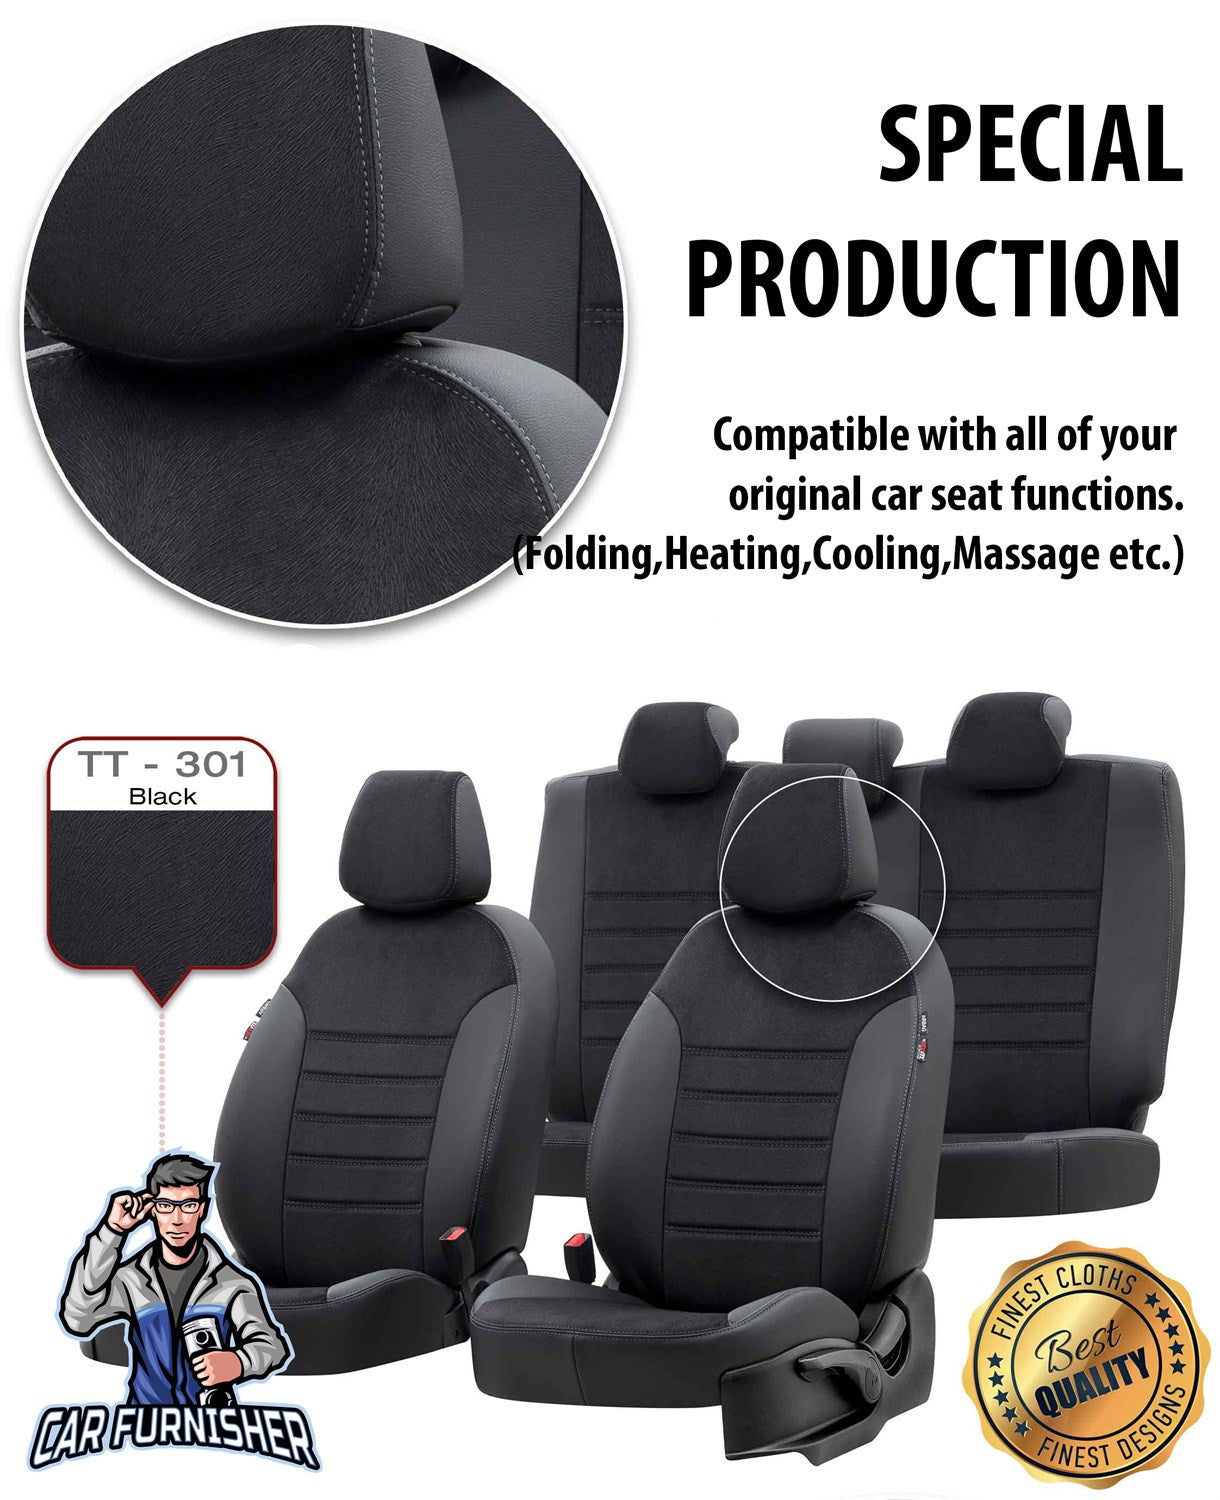 Volkswagen Crafter Seat Cover London Foal Feather Design Black Leather & Foal Feather